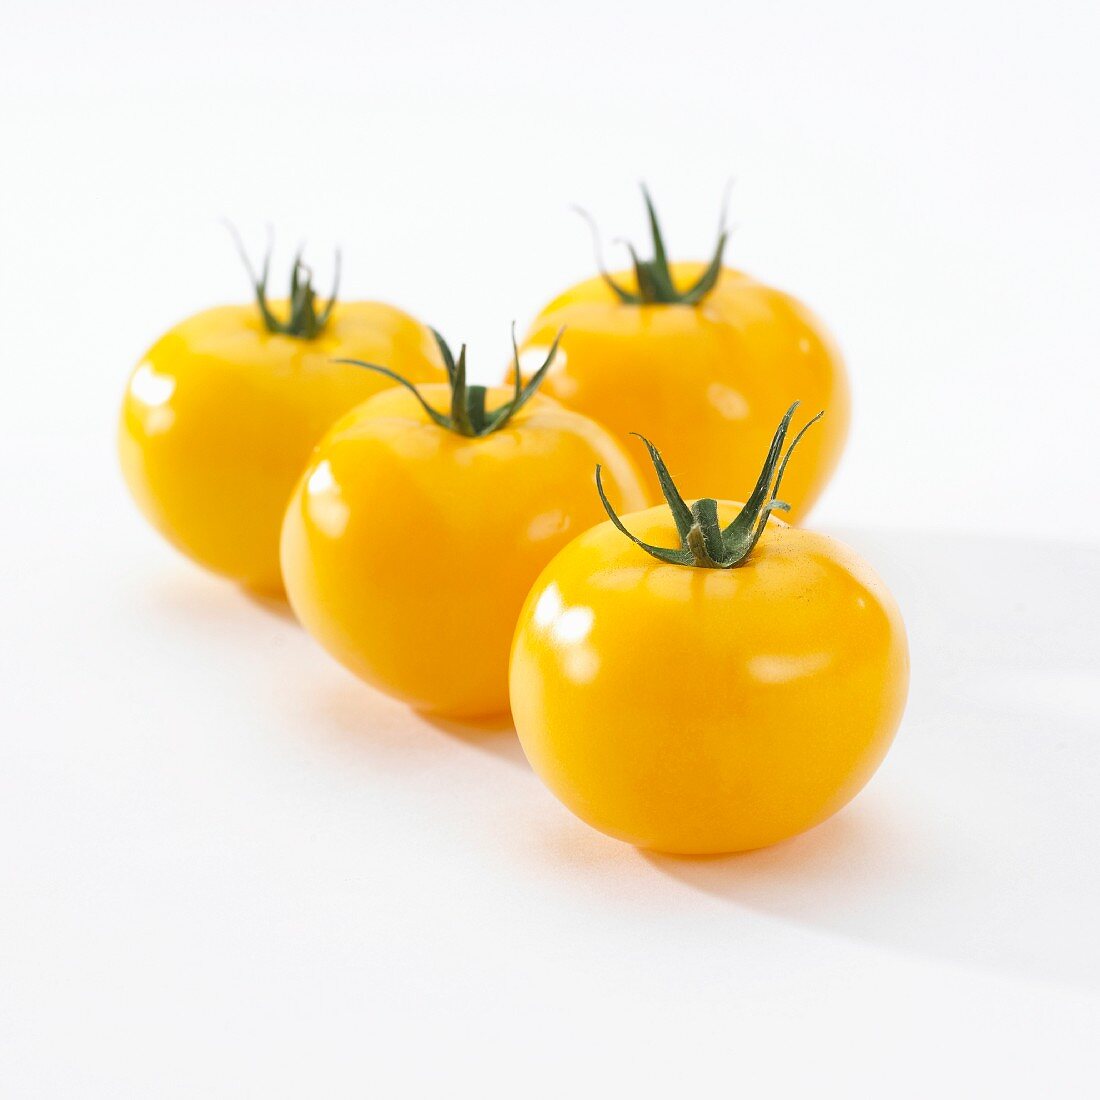 For yellow tomatoes (Lycopersicon)